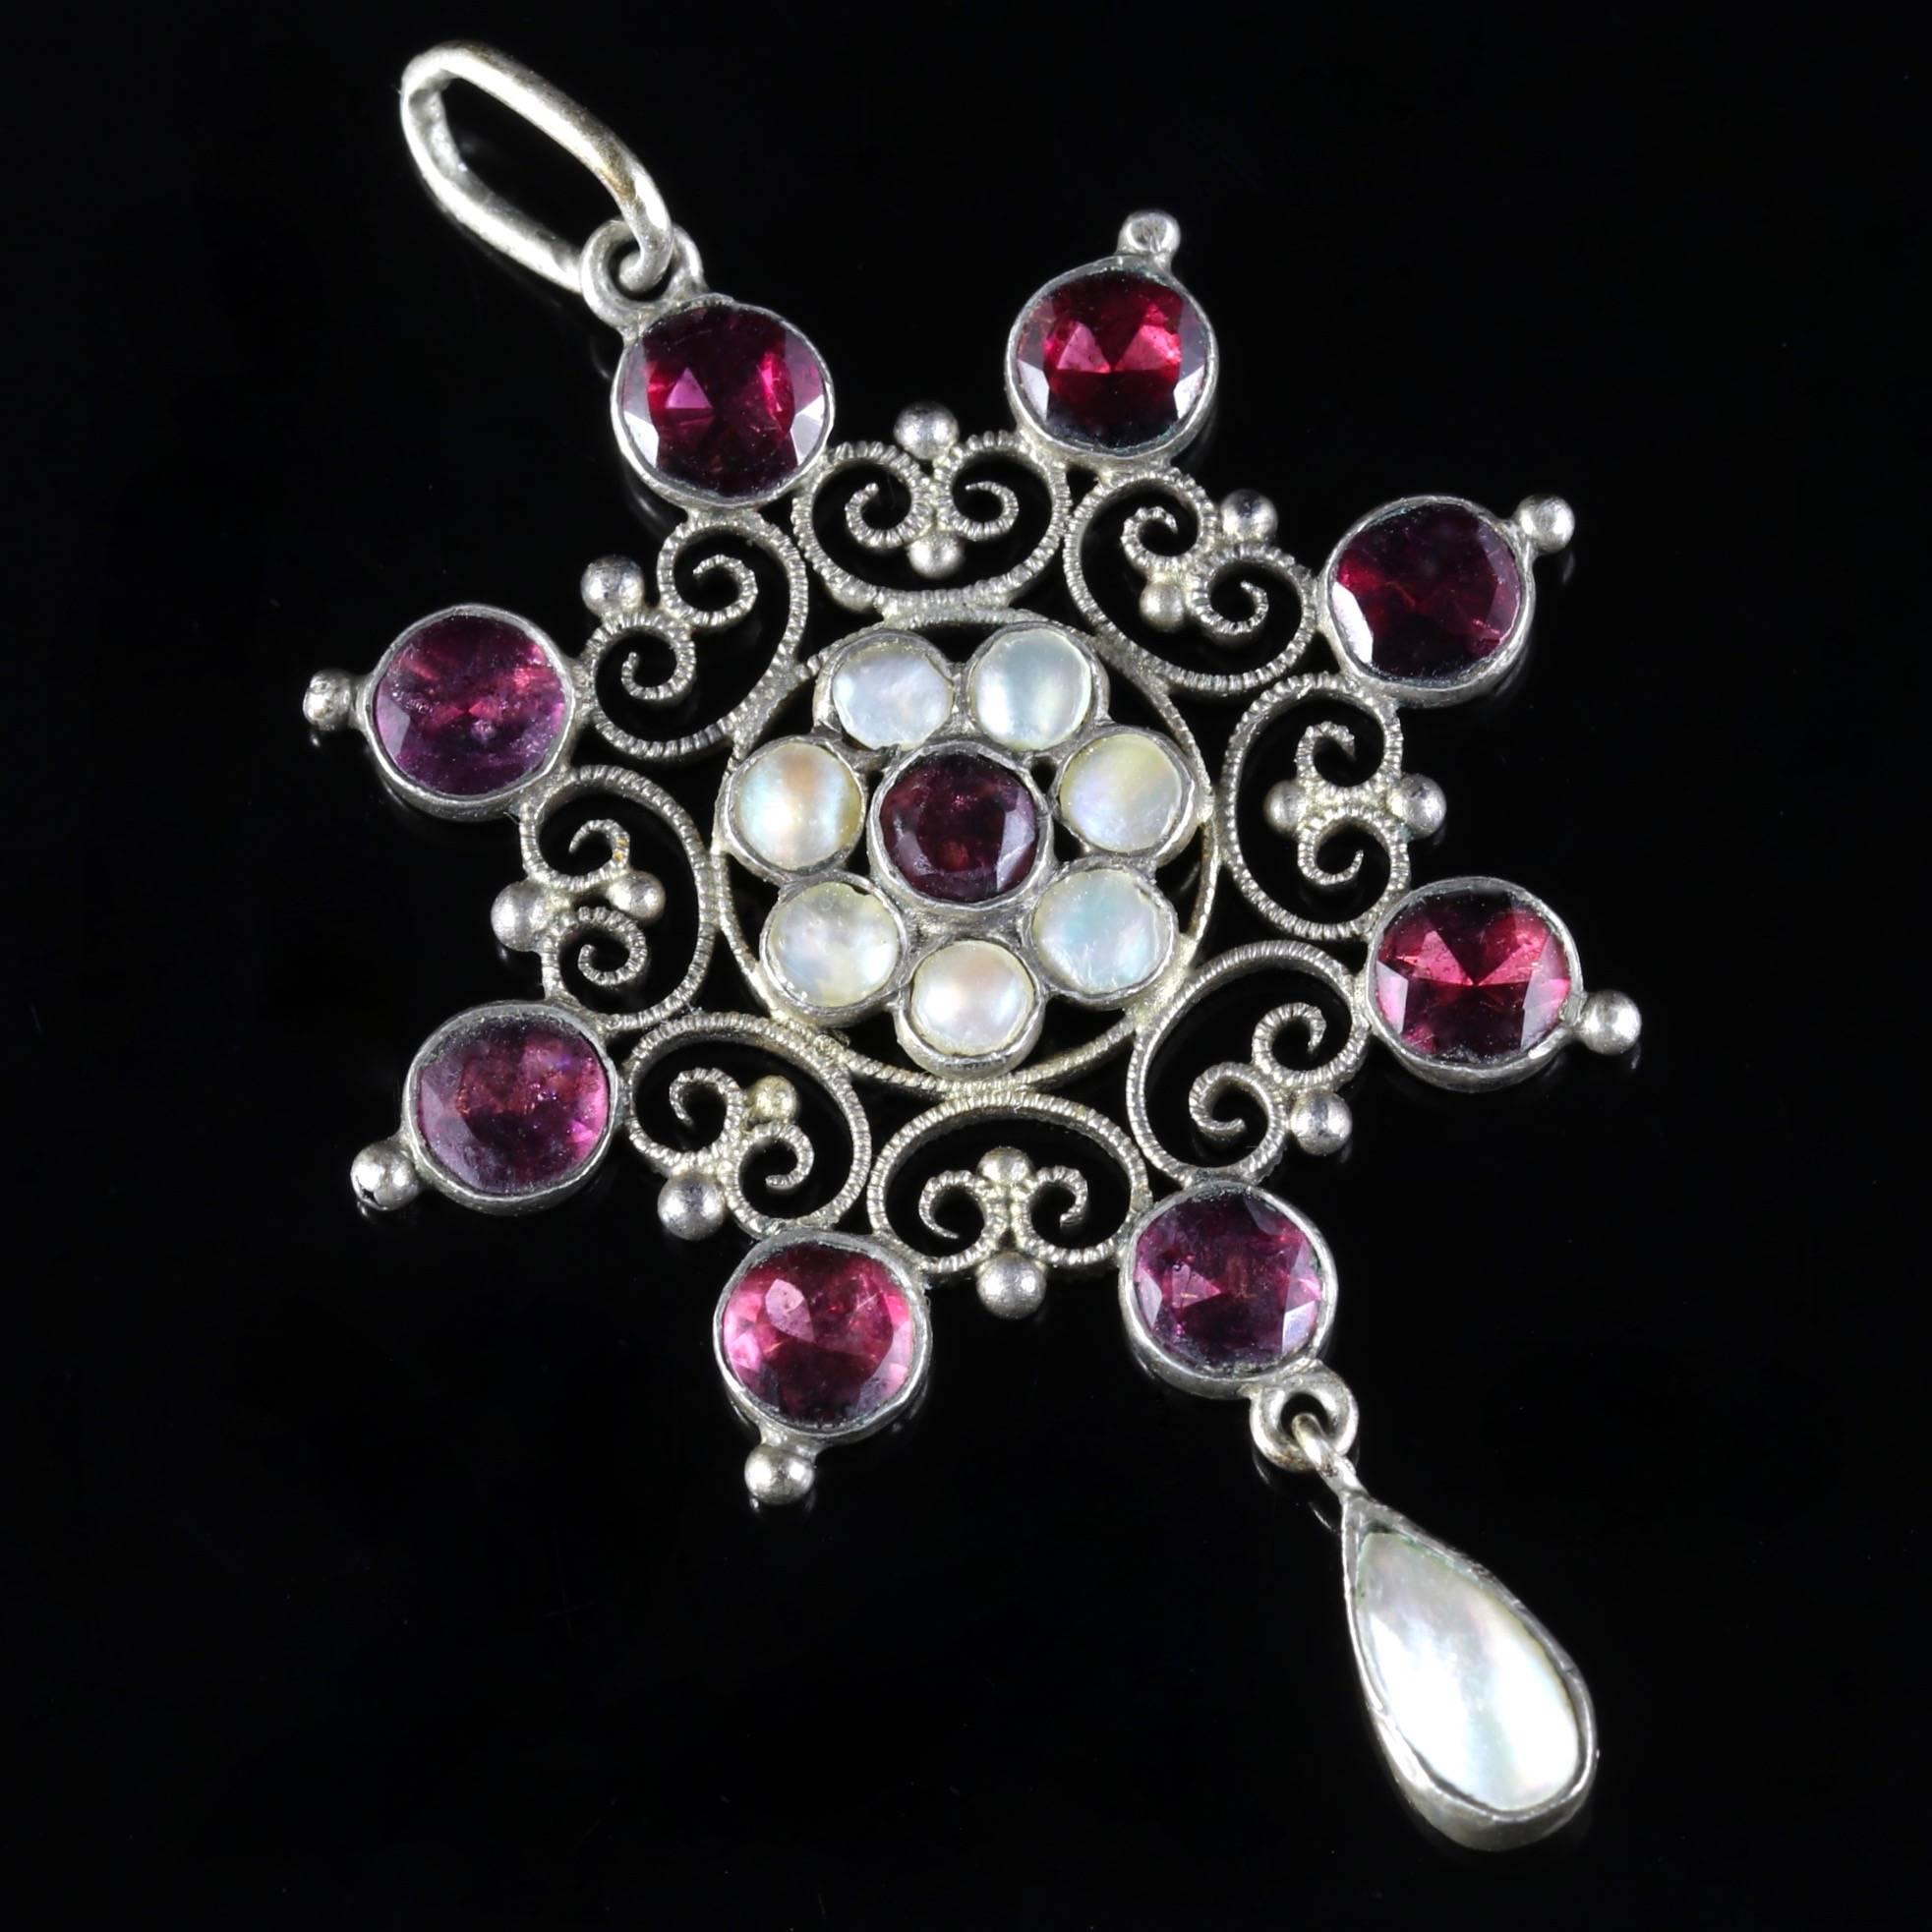 This fabulous Arts and Crafts Flat Top Garnet and Blister Pearl pendant is modelled in Silver and Metal, Circa 1900. 

The lovely pendant is adorned with 8 deep, red Garnets which surround a charming flower which has 7 Blister Pearls nested inside